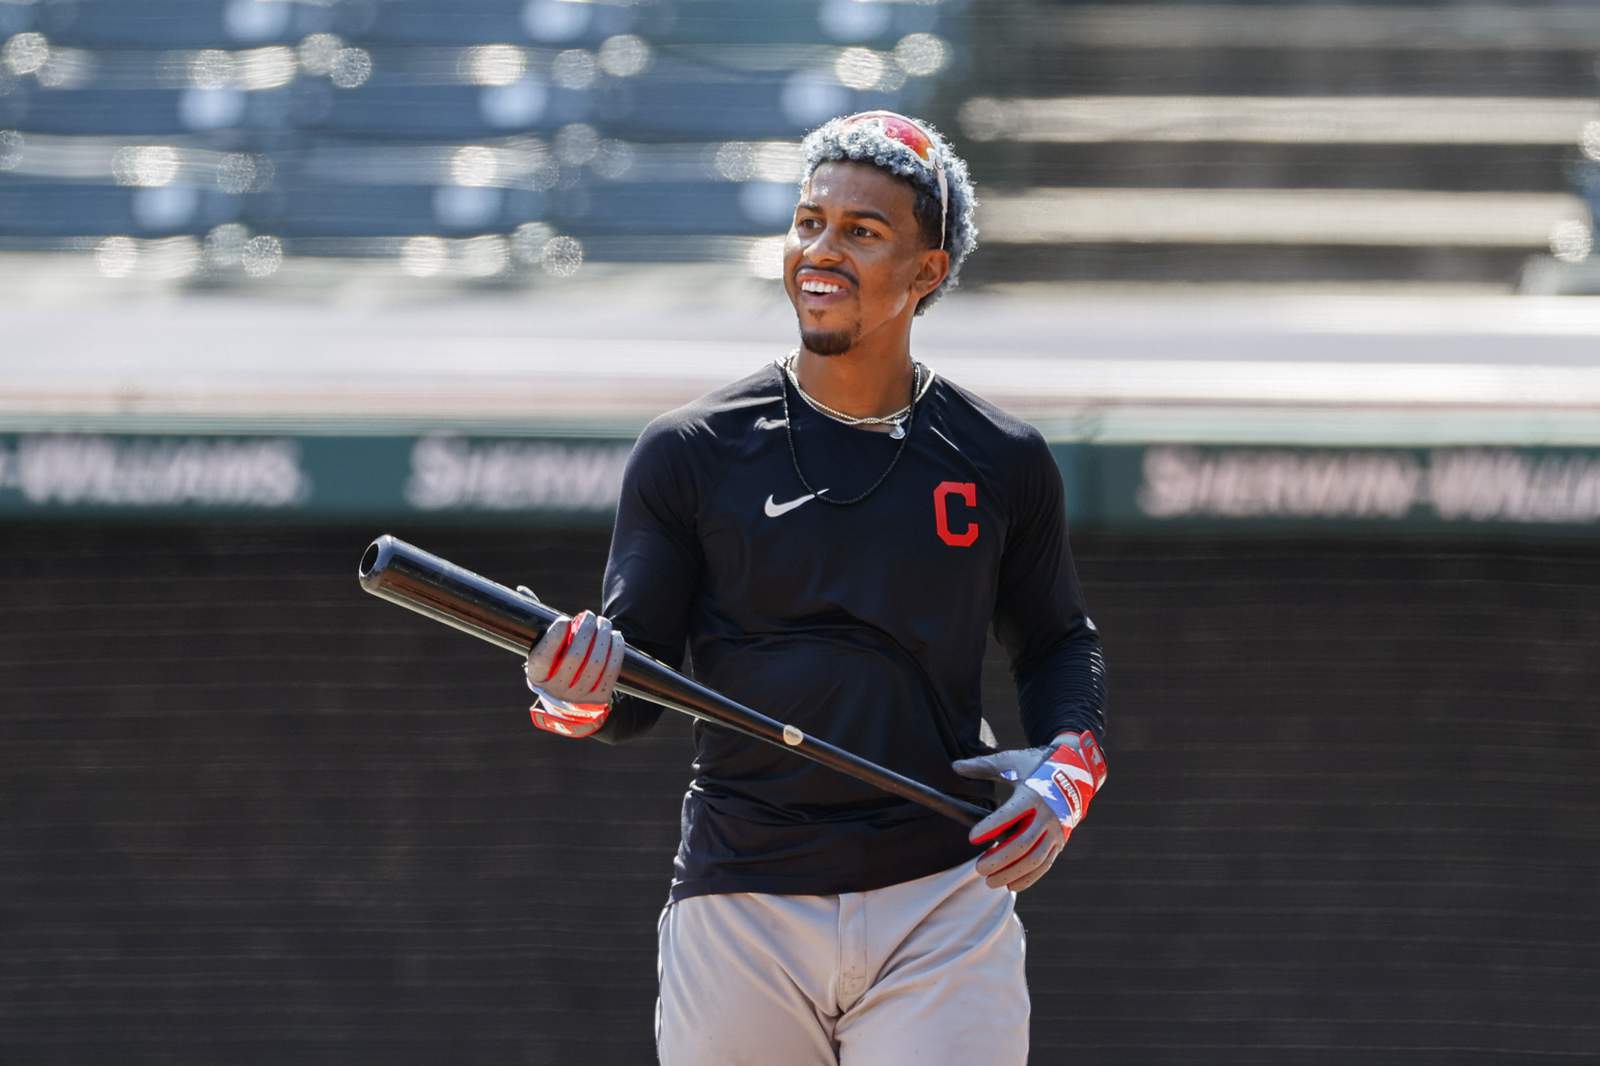 Big stick: Lindor focused on season, not future in Cleveland